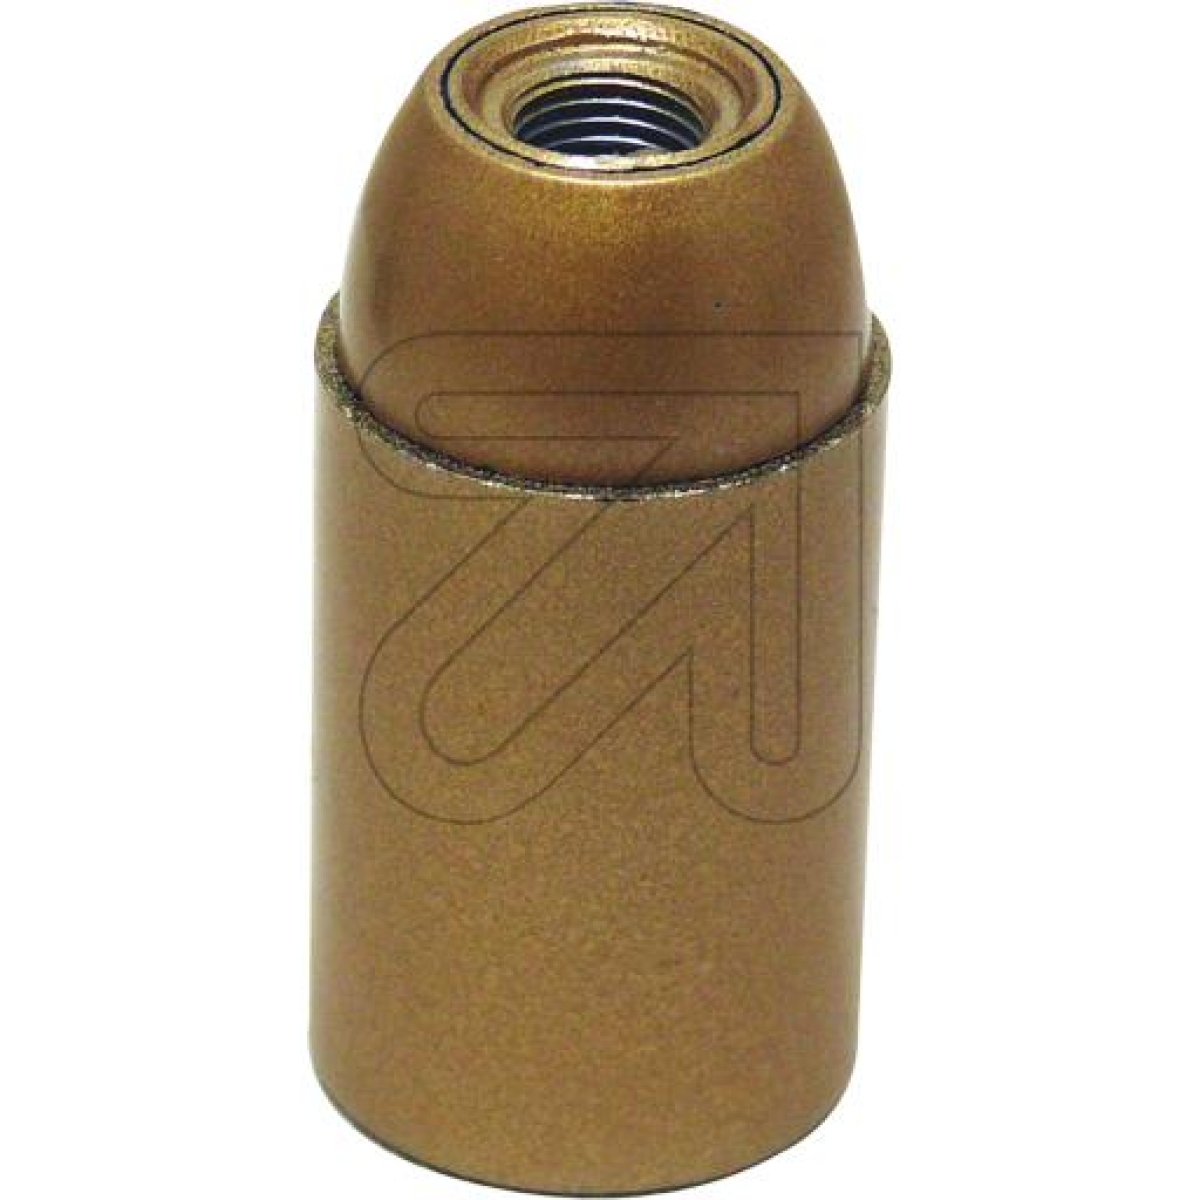 electroplastIso socket E14 gold-Price for 5 pcs.Article-No: 604115